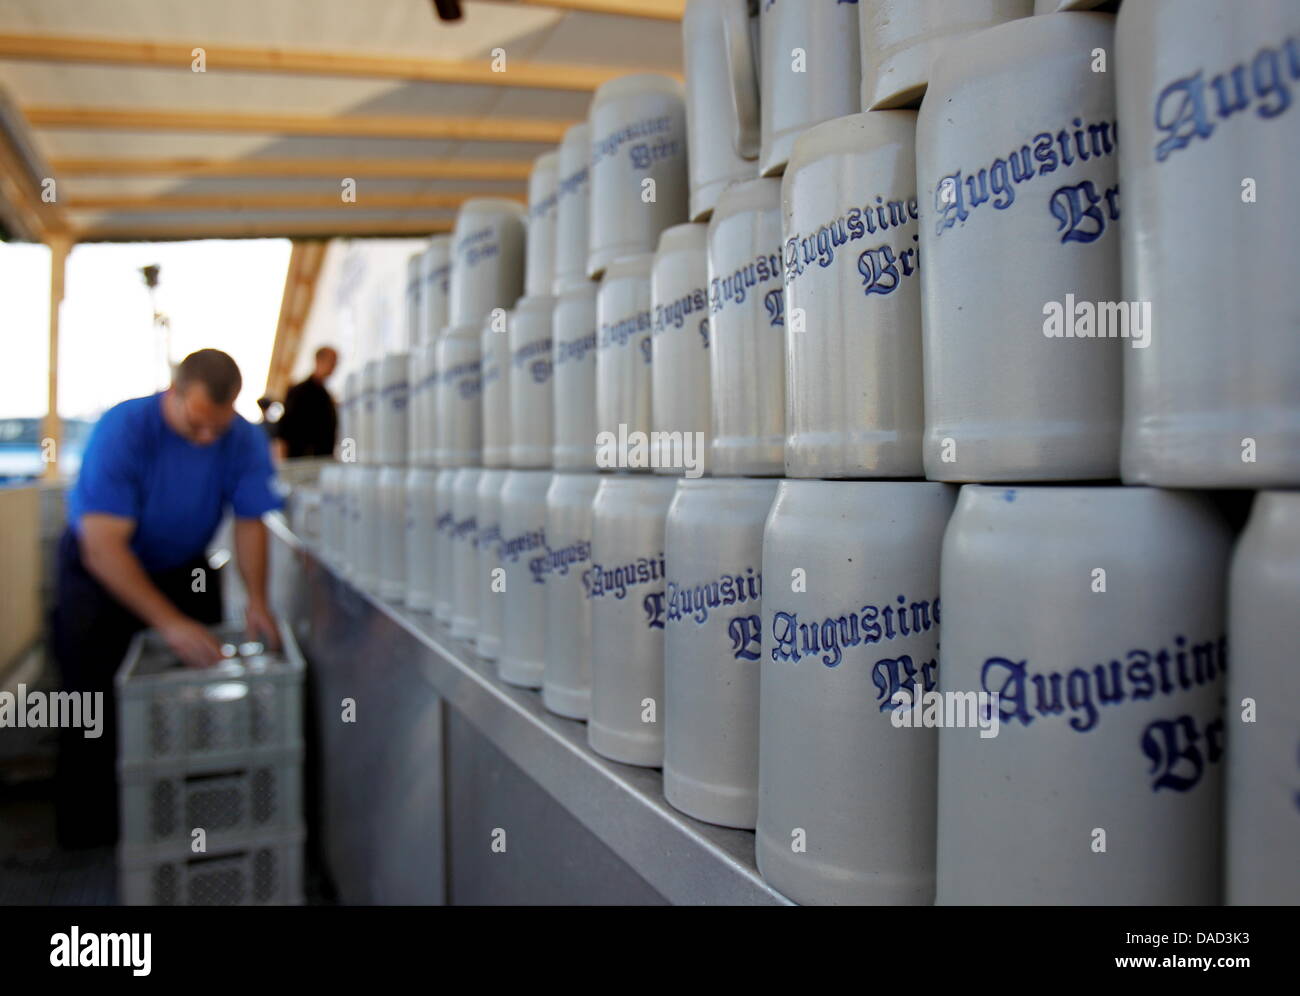 A man packs beer mugs of the Augustiner brewery after the end of Oktoberfest in Munich, Germany, 04 October 2011. The Oktoberfest has witnessed a veritable onslaught of visitors this year. Perfect weather conditions and the nostalgic charm of the 'Oide Wiesn' have drawn more visitors than last year. Despite the increased number of visitors there were fewer police deployments and fe Stock Photo